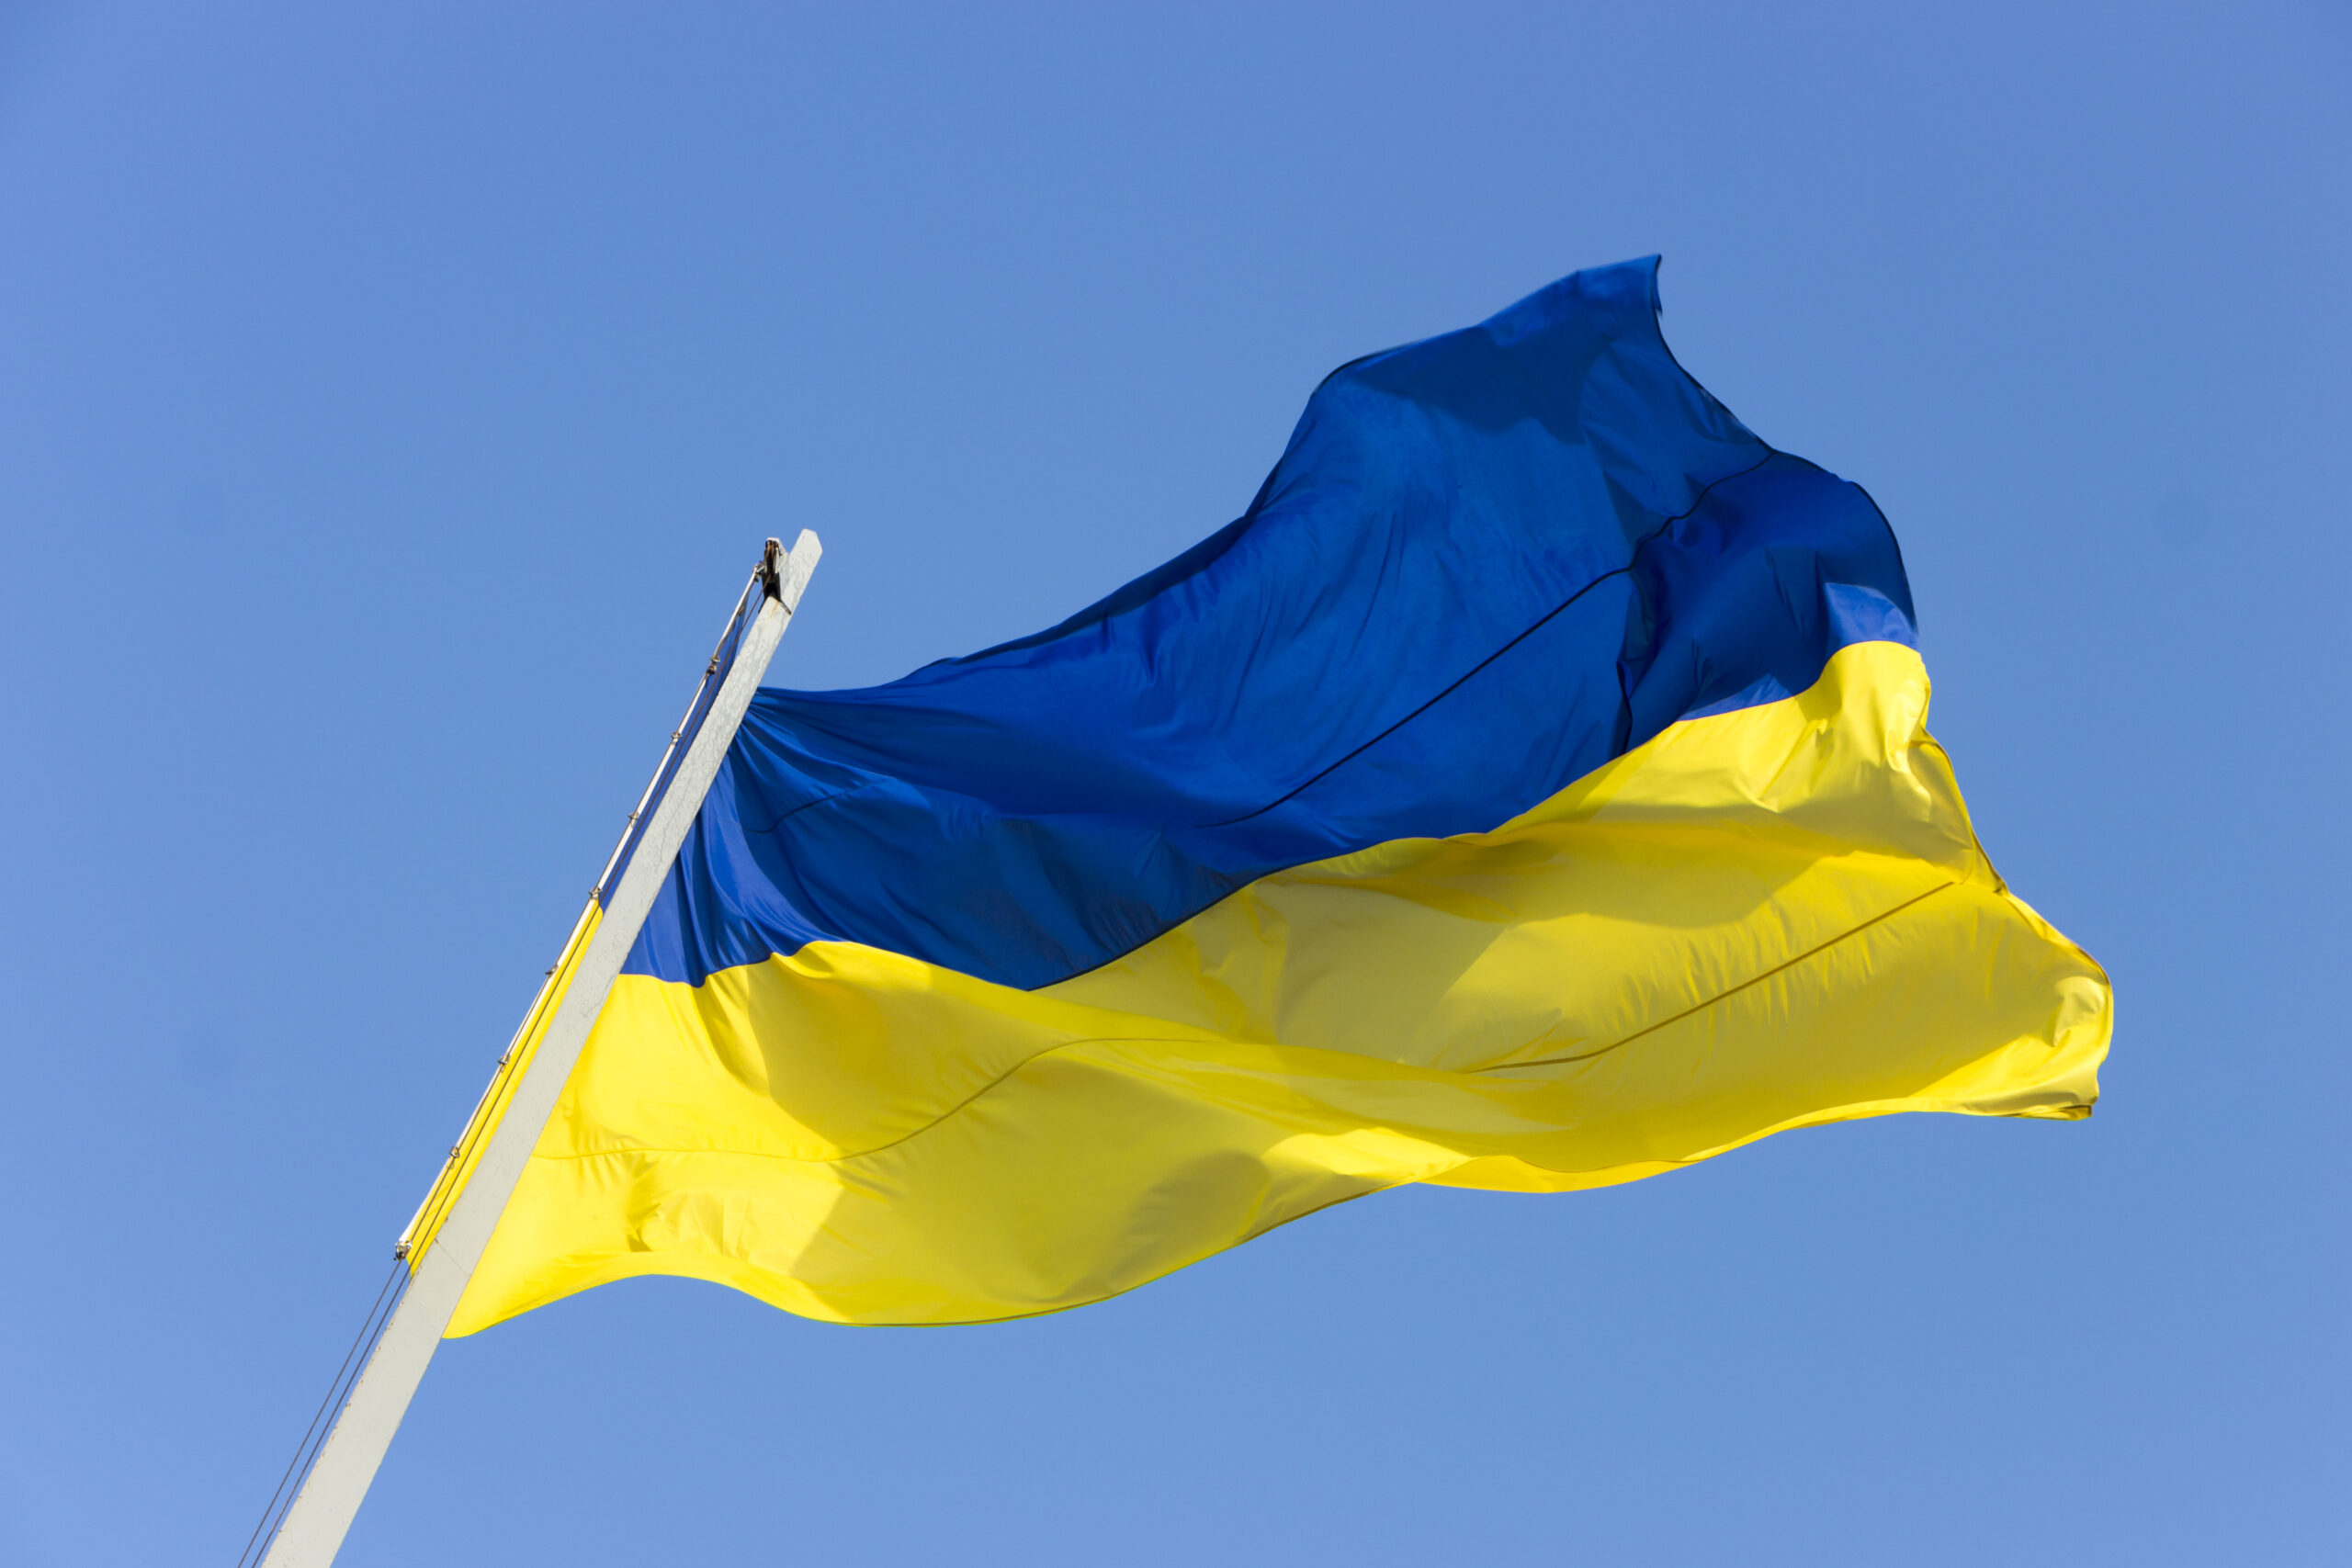 An update on Ukraine-related decisions - IMD Business School